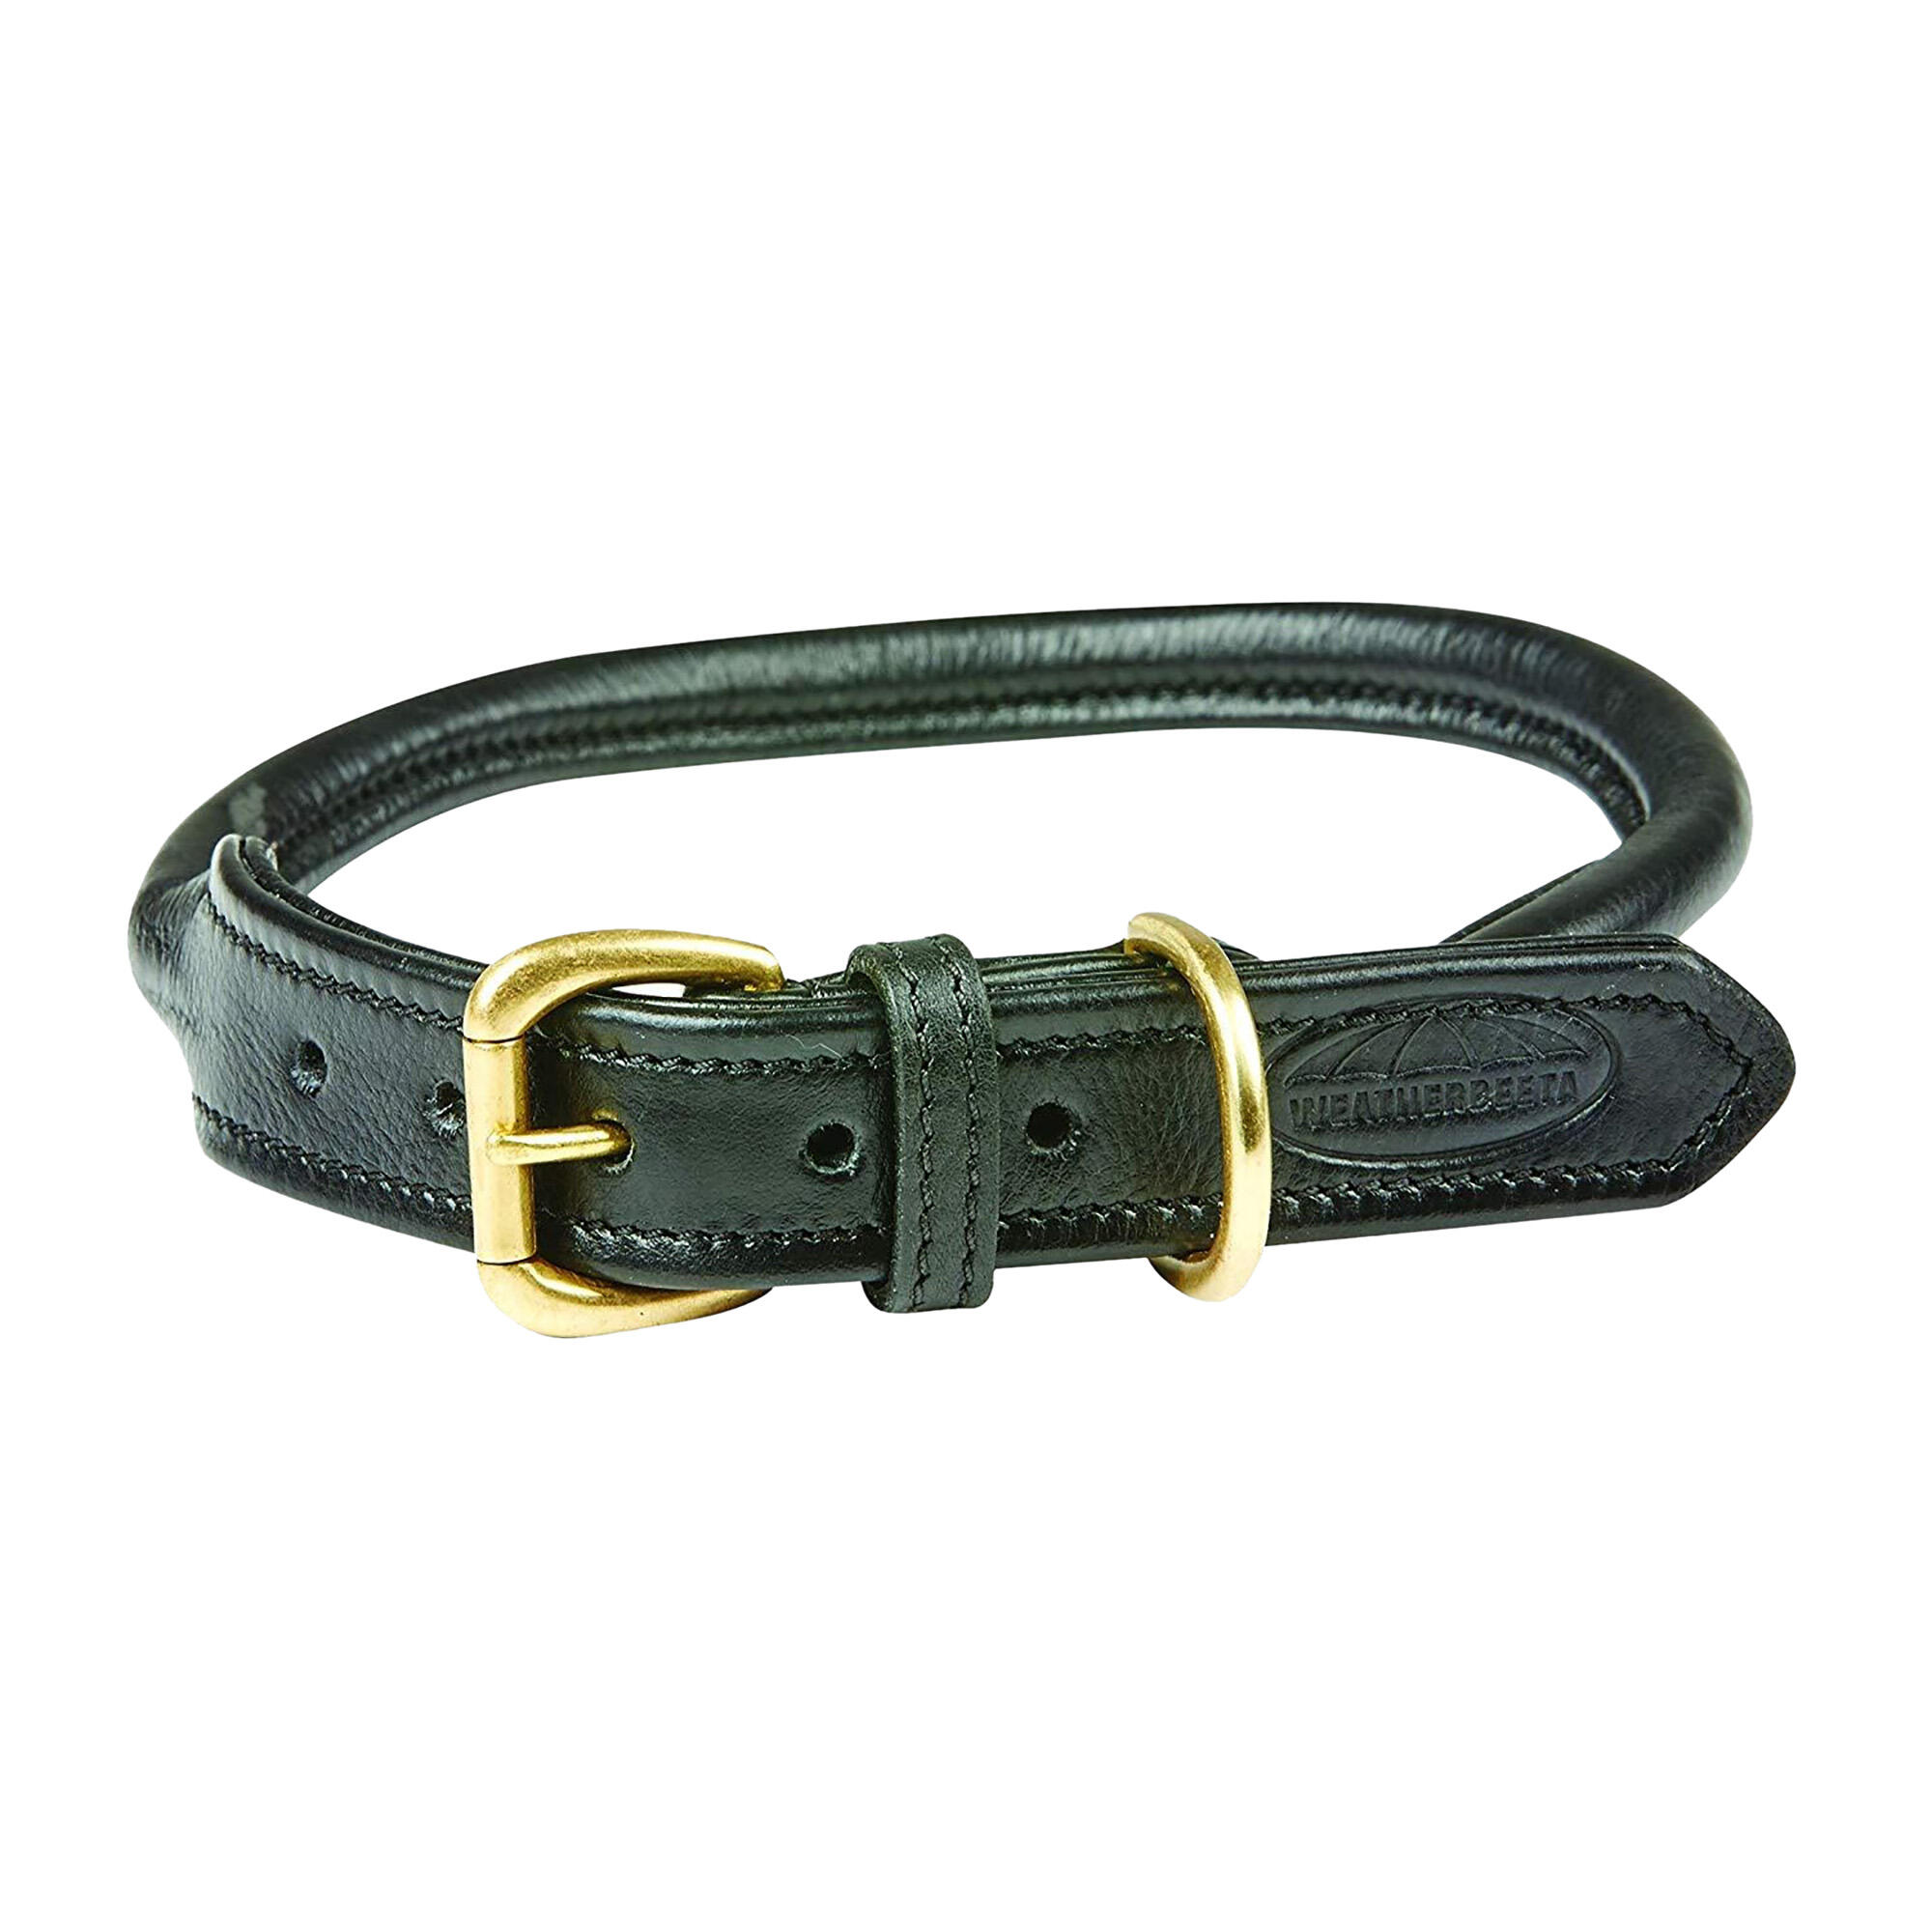 Rolled Leather Dog Collar (Black) 1/2